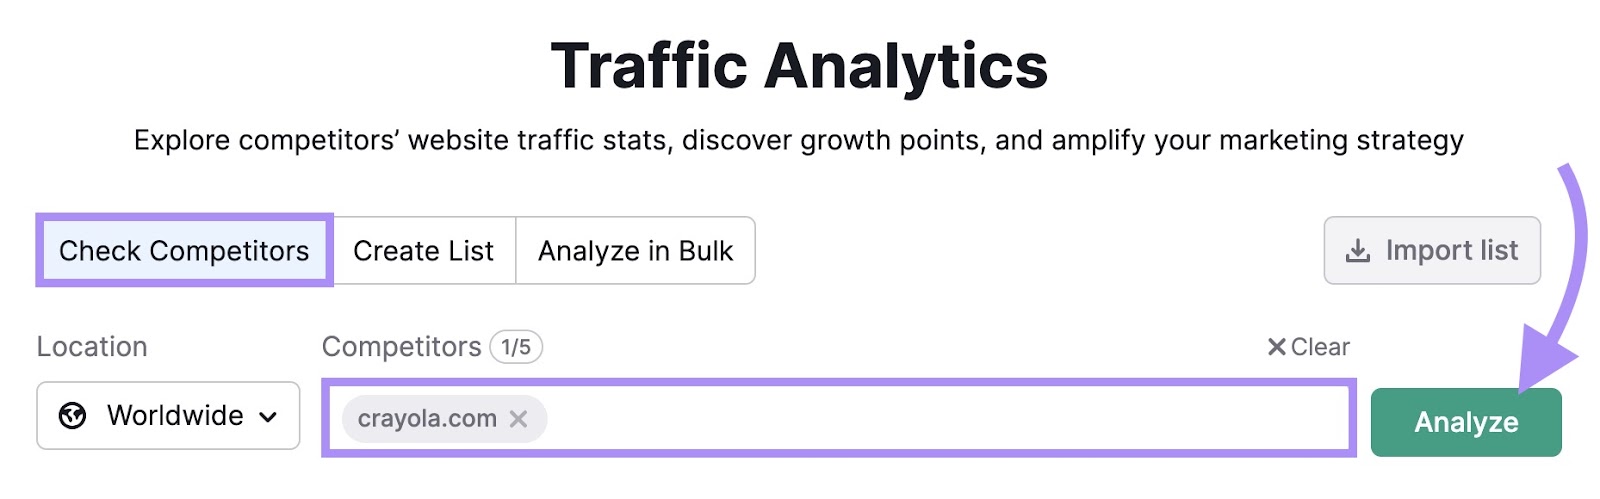 "crayola.com" entered into the Traffic Analytics tool search bar